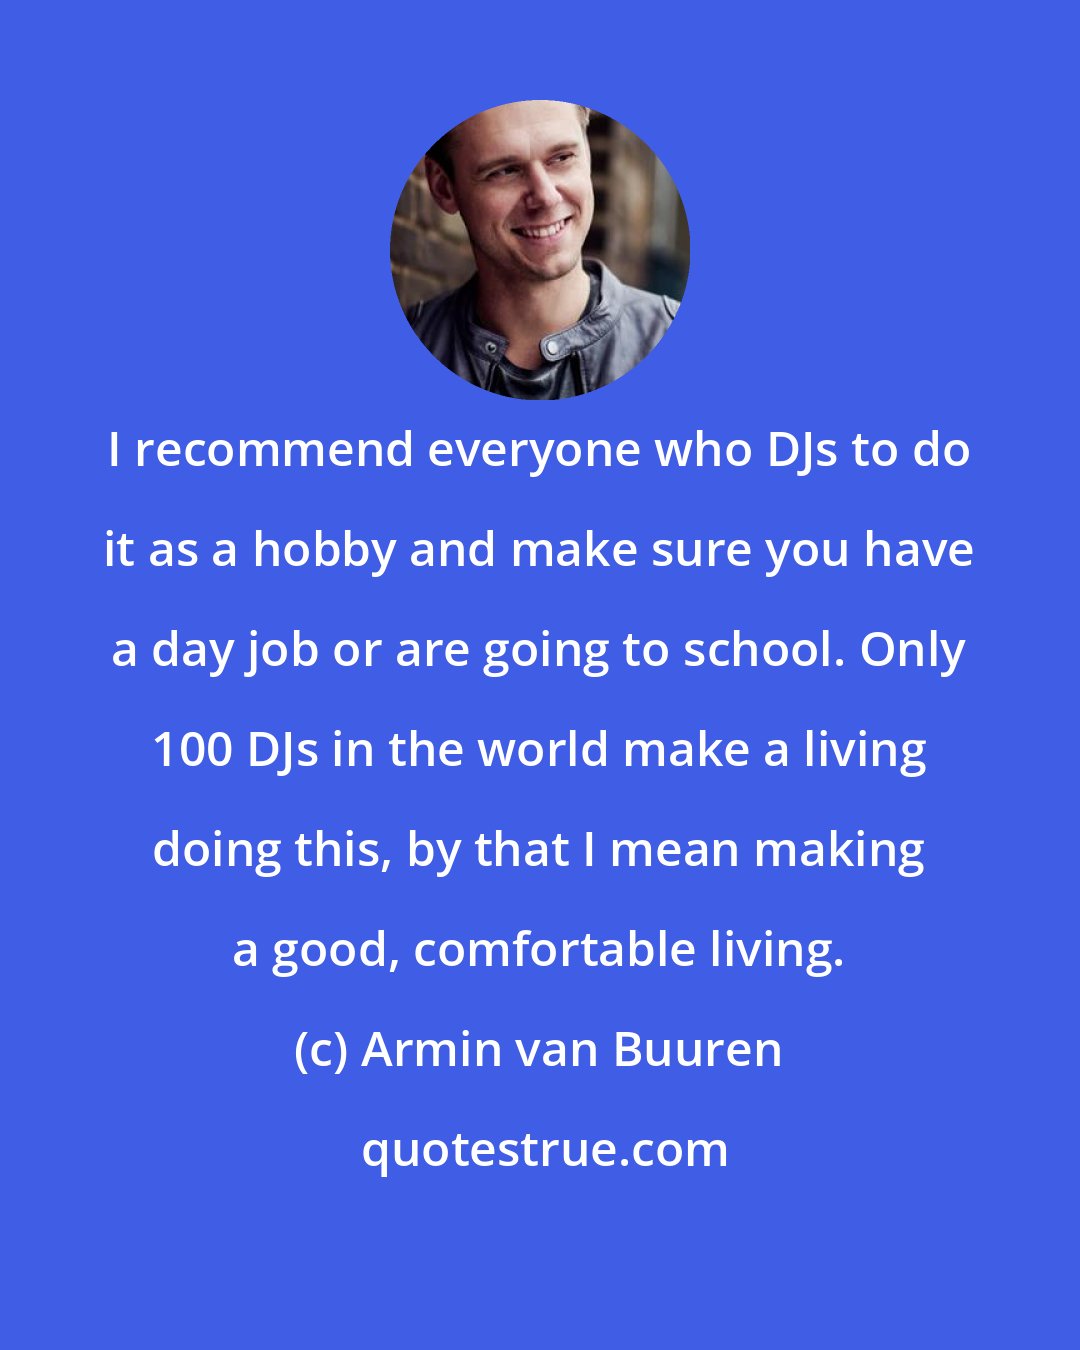 Armin van Buuren: I recommend everyone who DJs to do it as a hobby and make sure you have a day job or are going to school. Only 100 DJs in the world make a living doing this, by that I mean making a good, comfortable living.